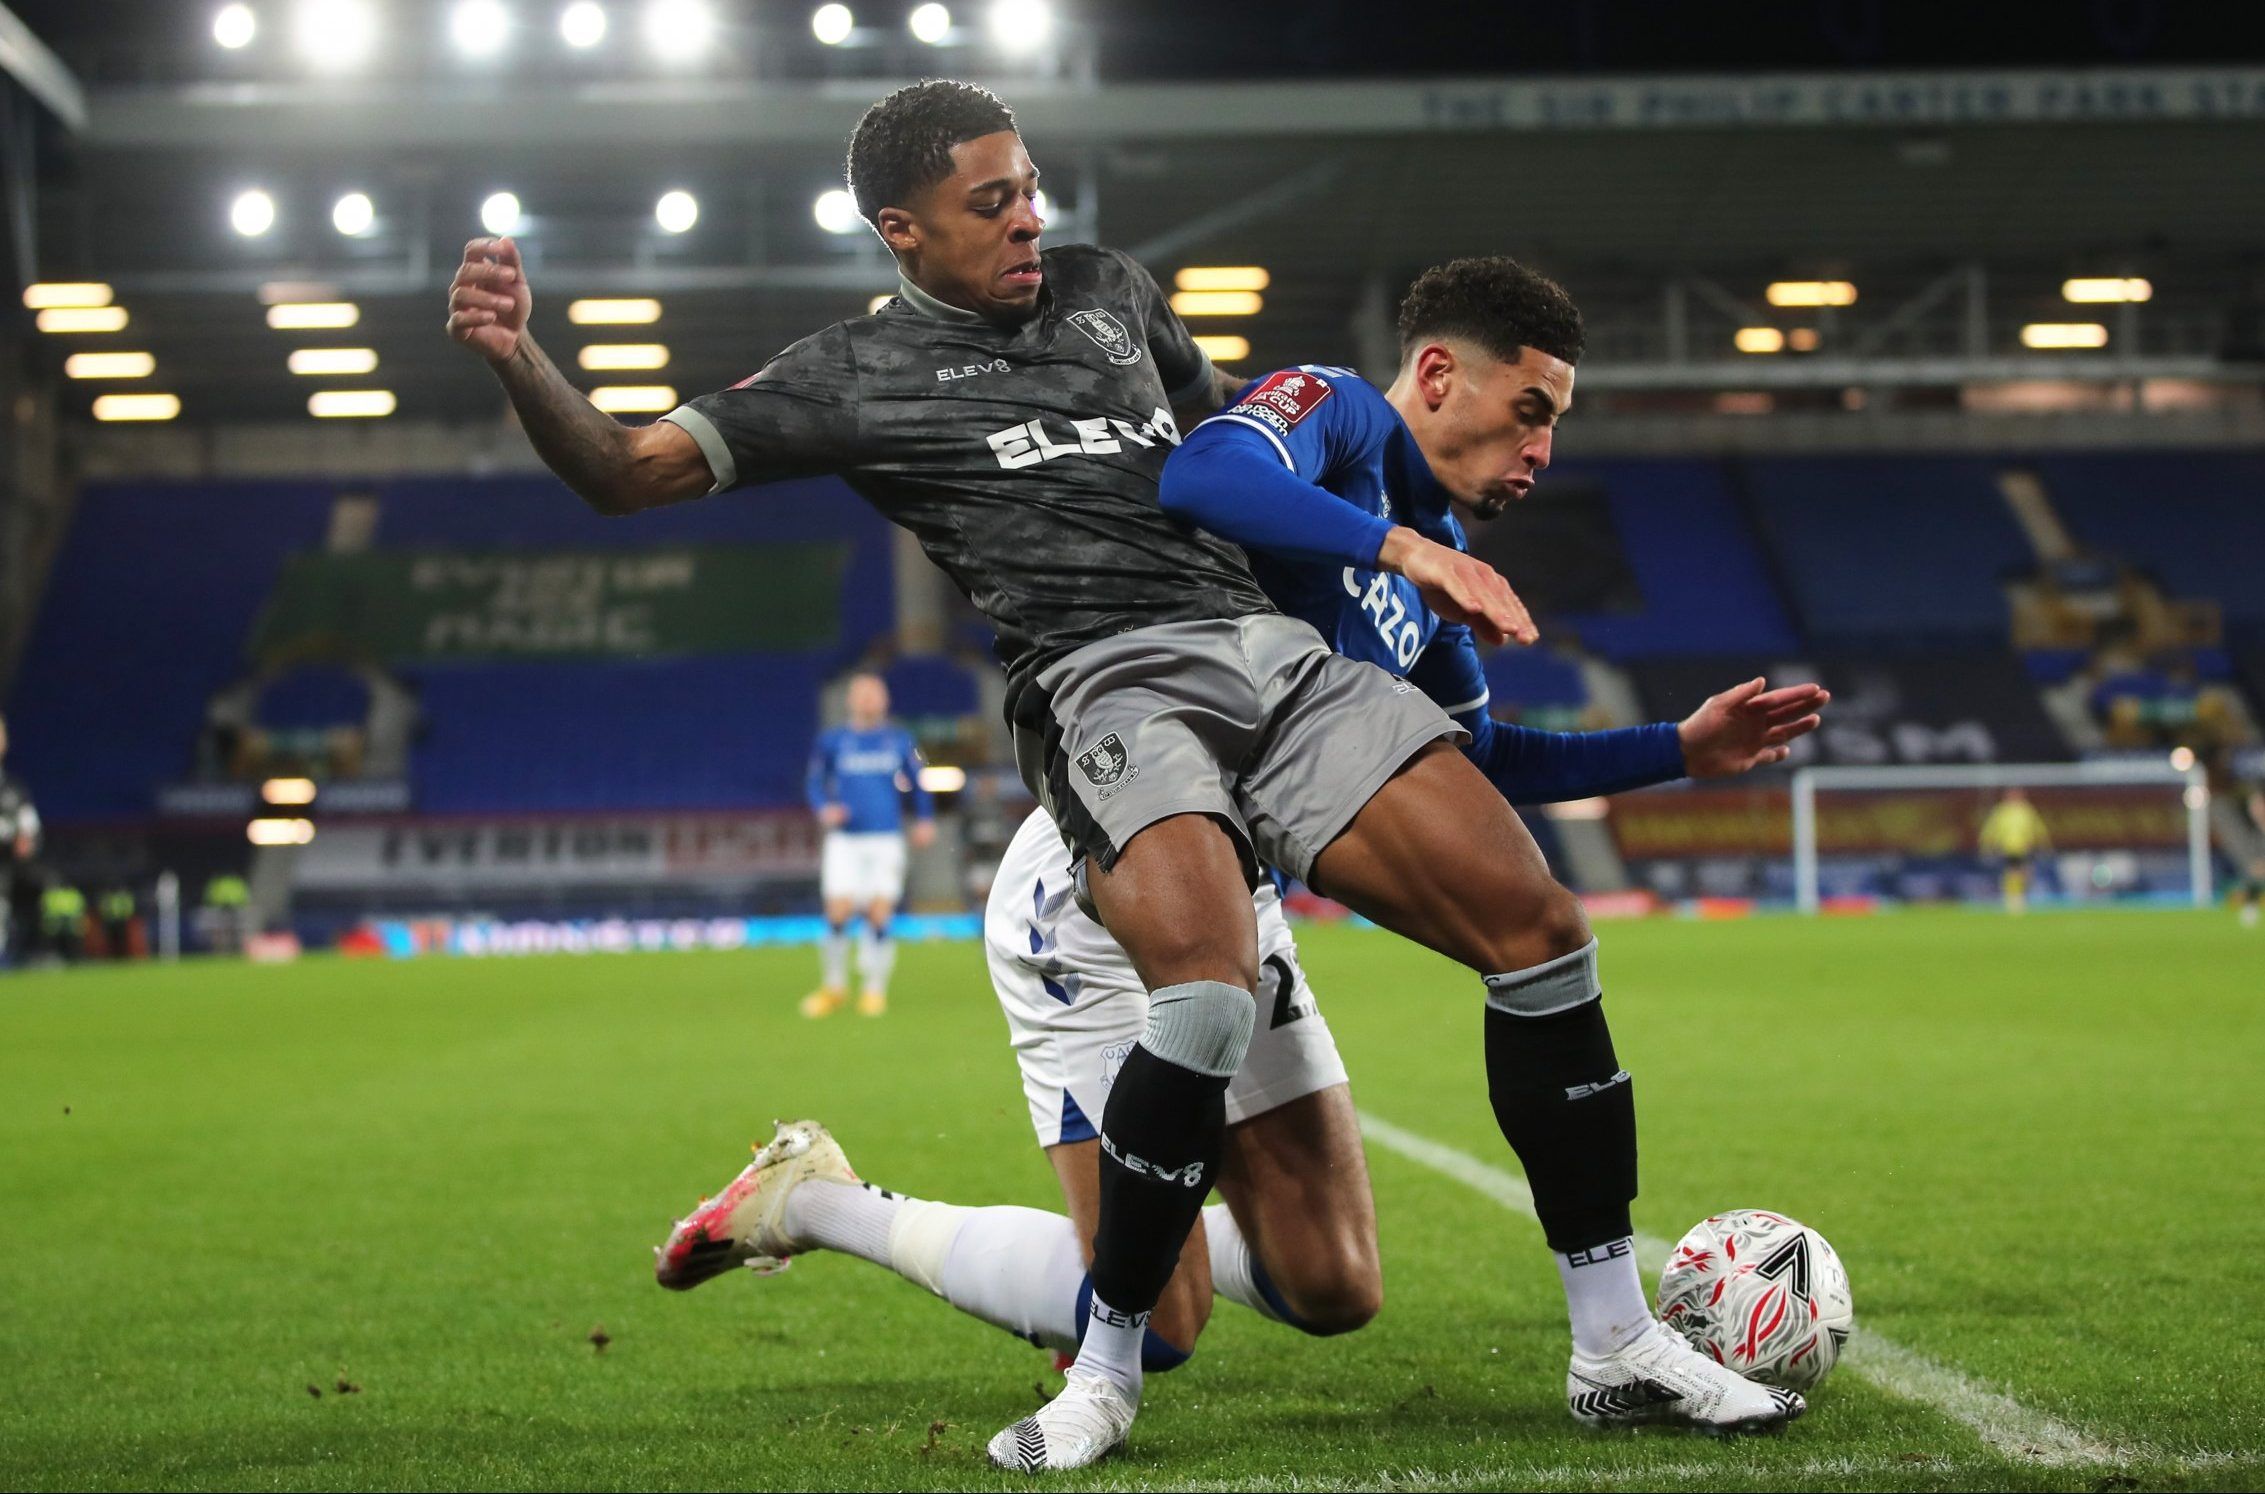 sheffield wednesday winger kadeem harris in action against everton fa cup fifth round